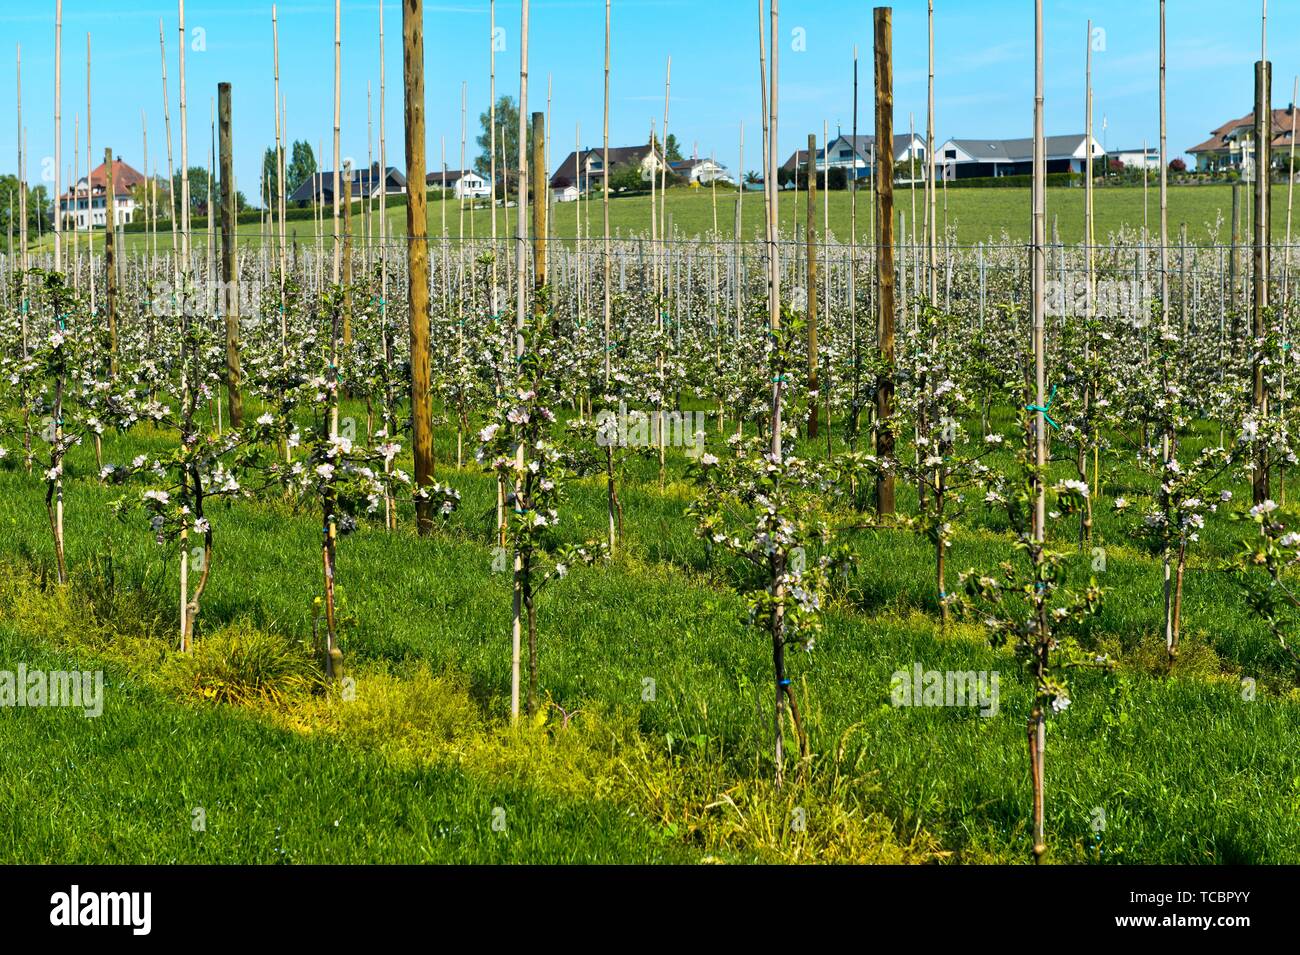 Apple tree plantation with young trees in half-standard tree cultivation in spring, canton of Thurgau, Switzerland. Stock Photo